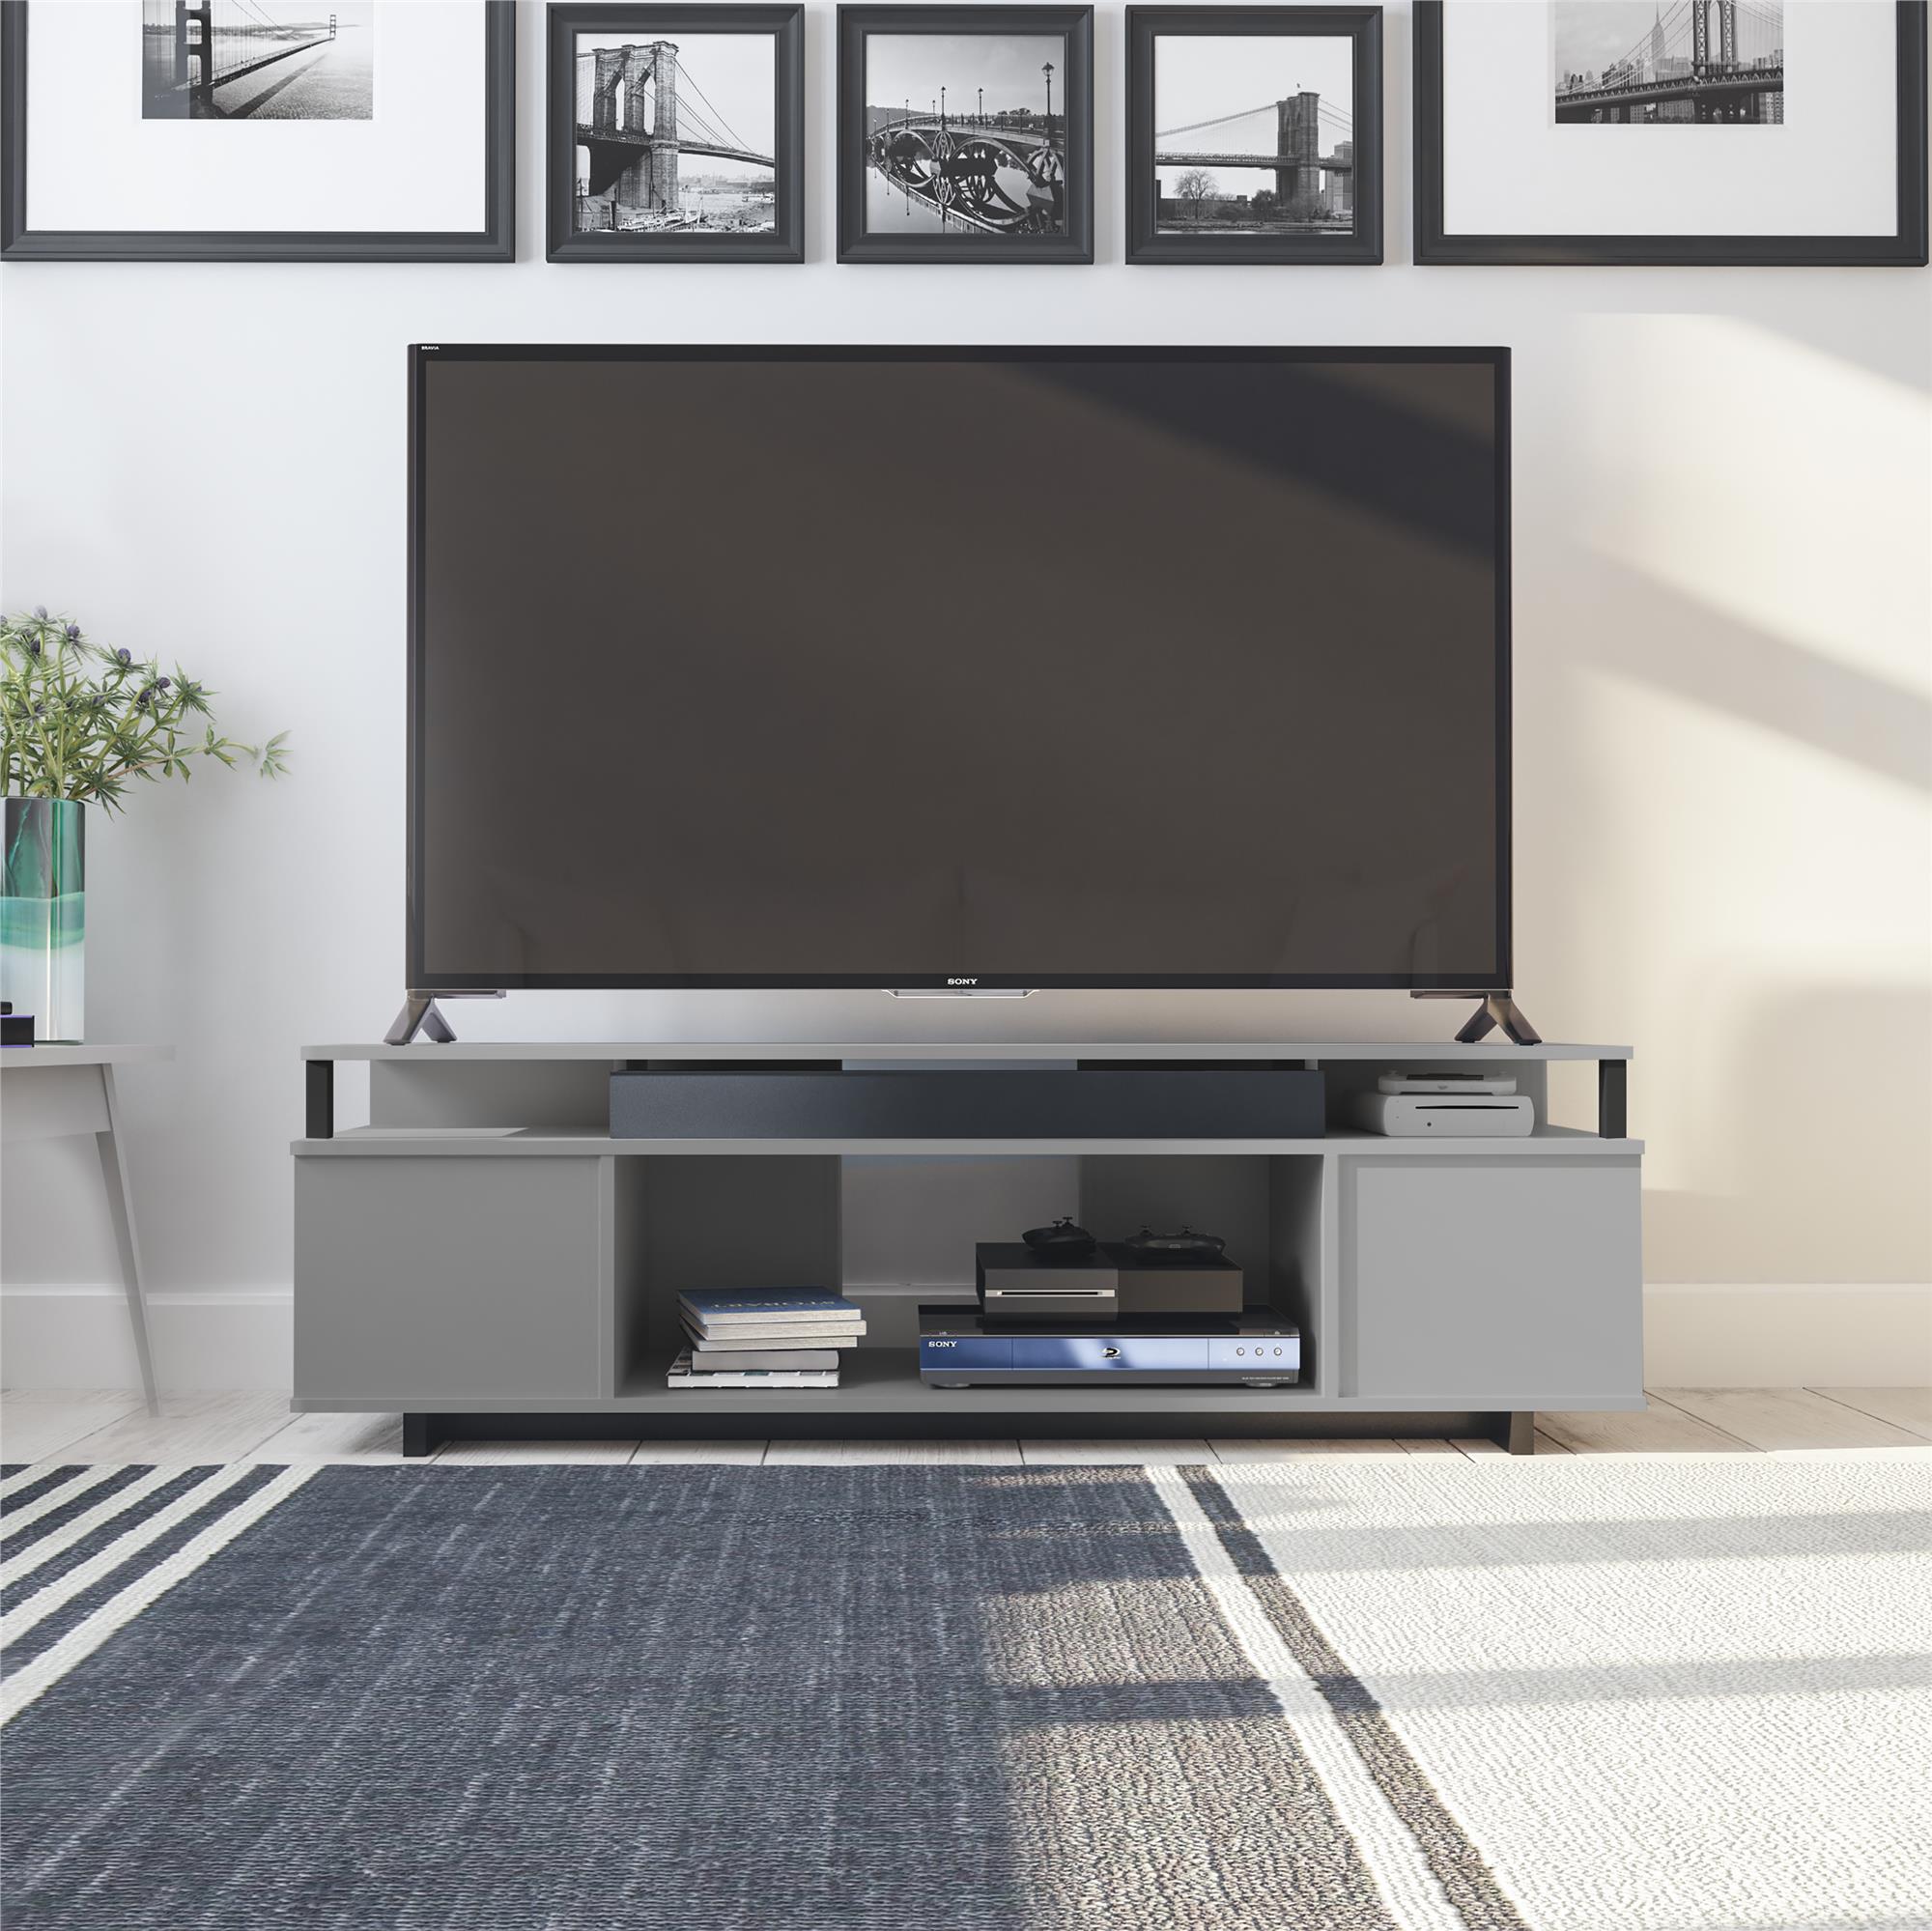 Ameriwood Home Kensington Place TV Stand for TVs up to 65", Dove Gray - image 1 of 5